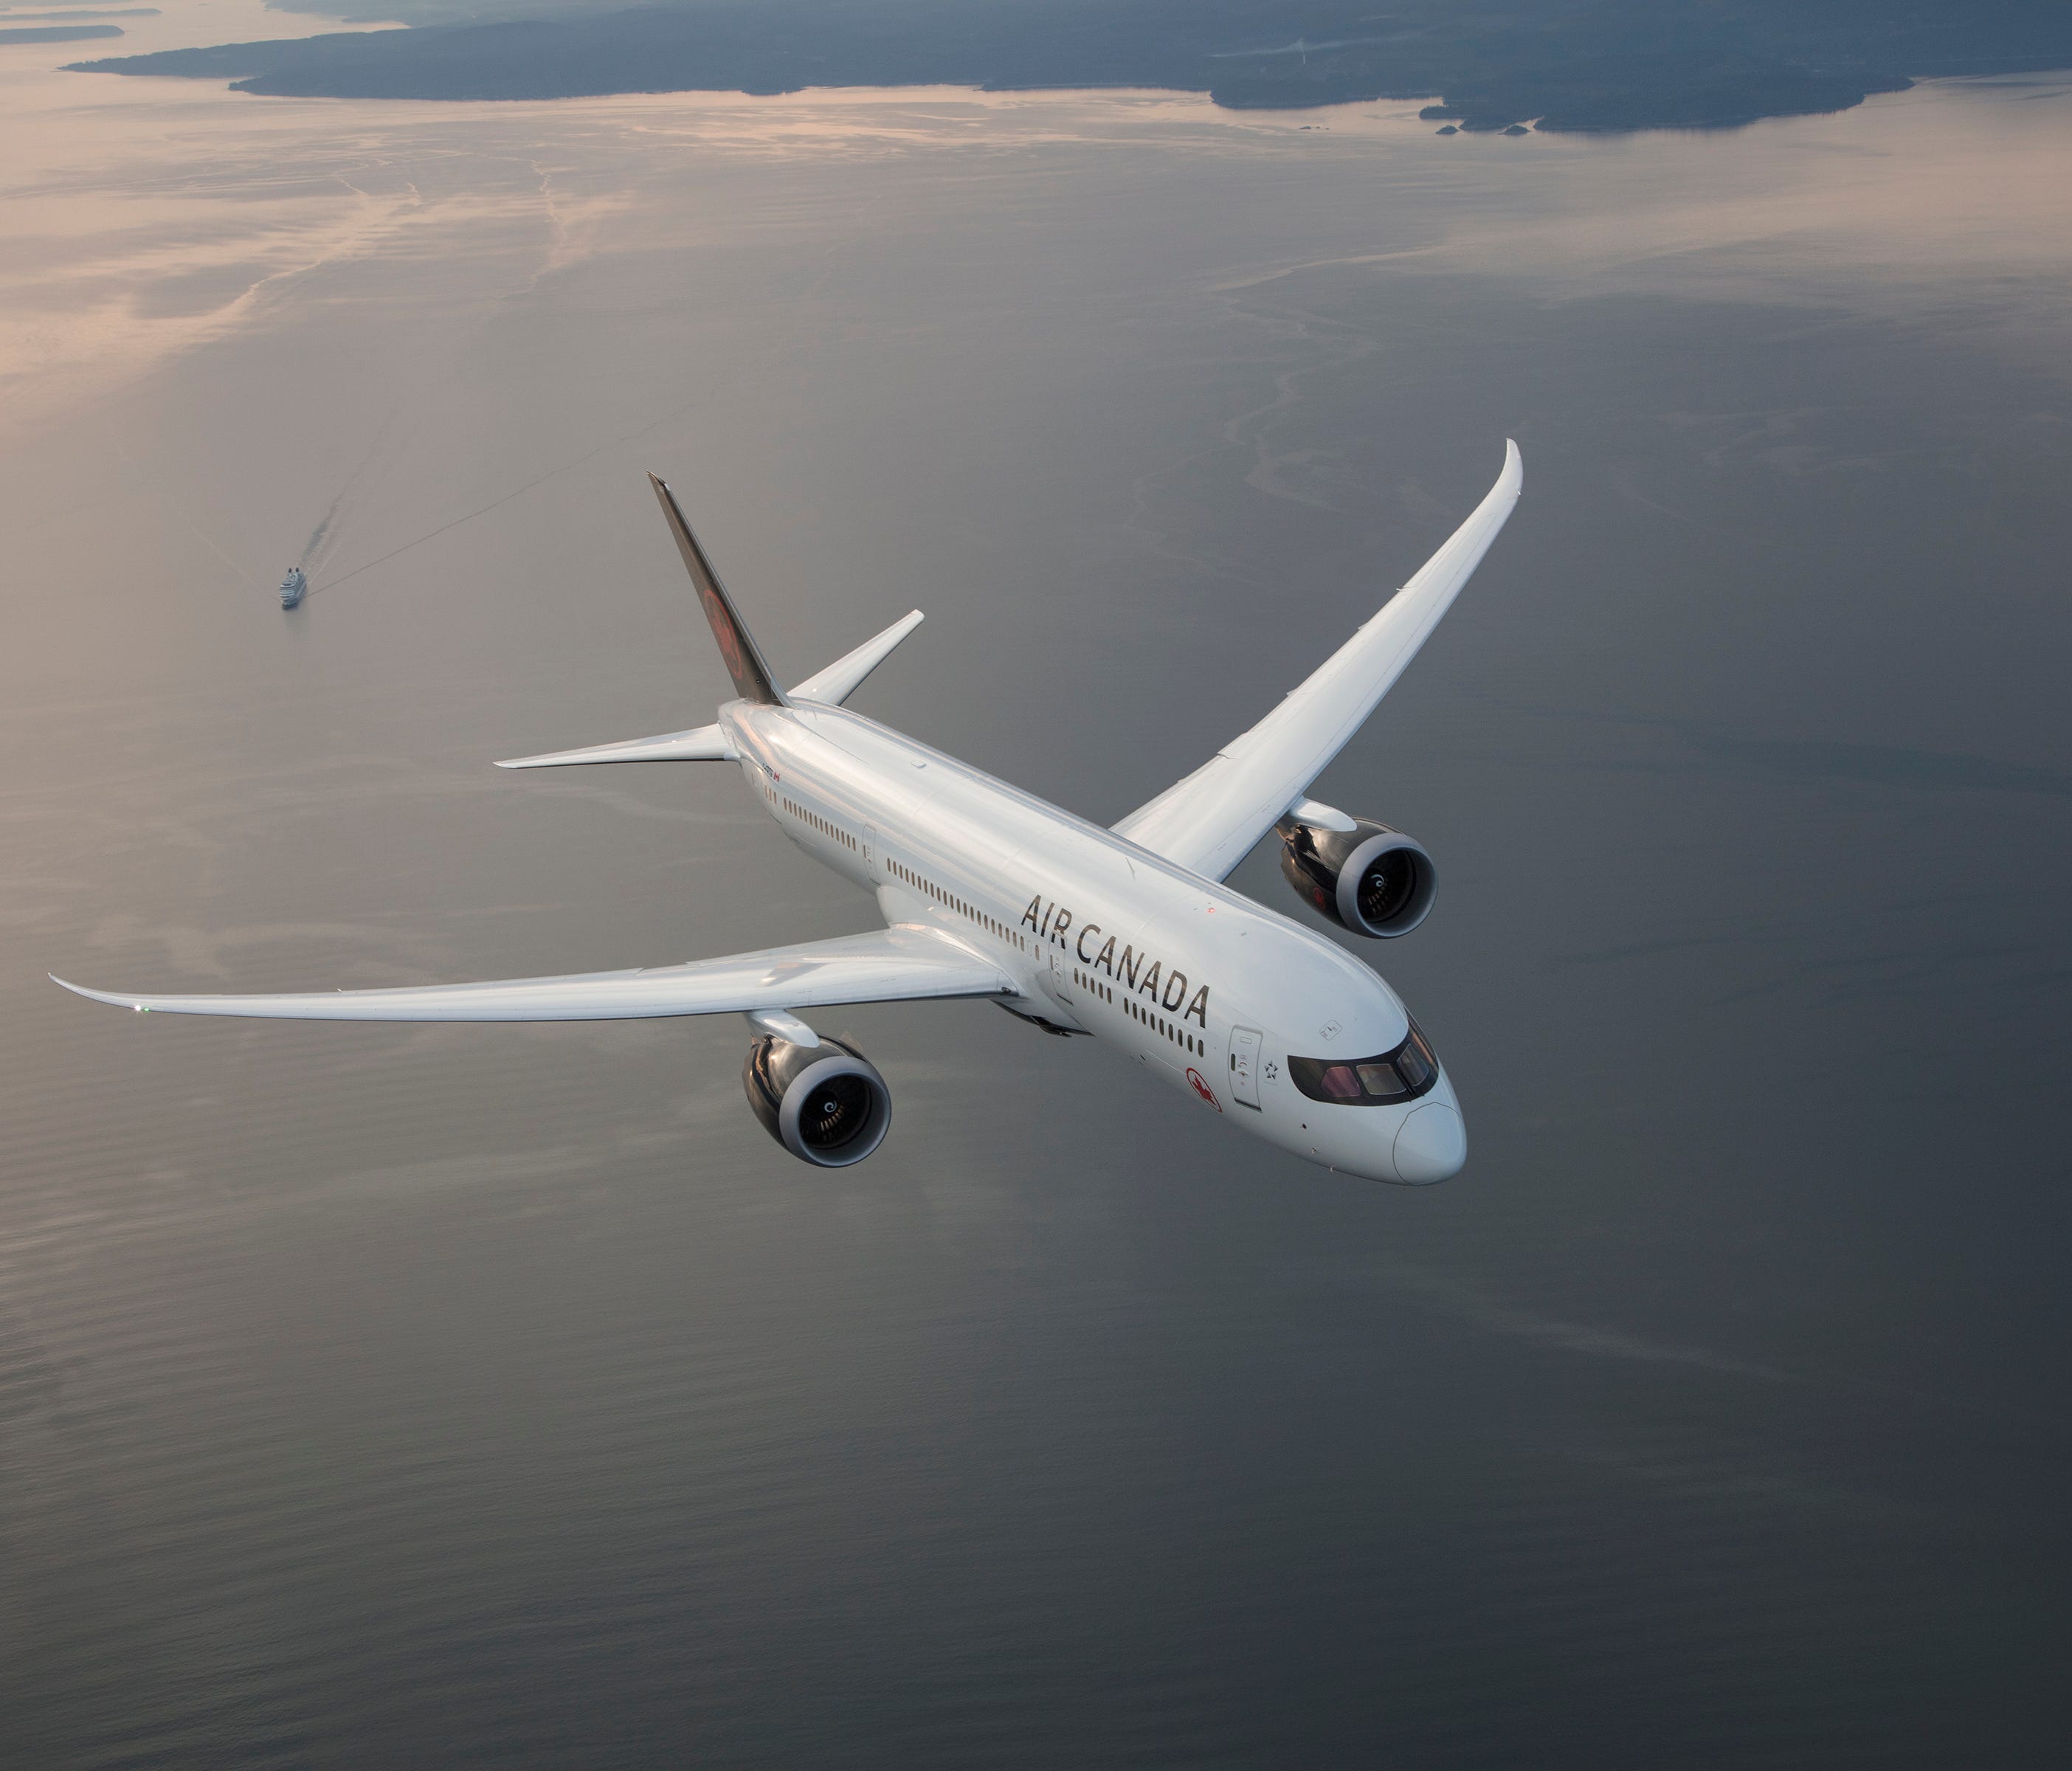 This image provided by Air Canada shows one of the airline's Boeing 787-9 Dreamliners.